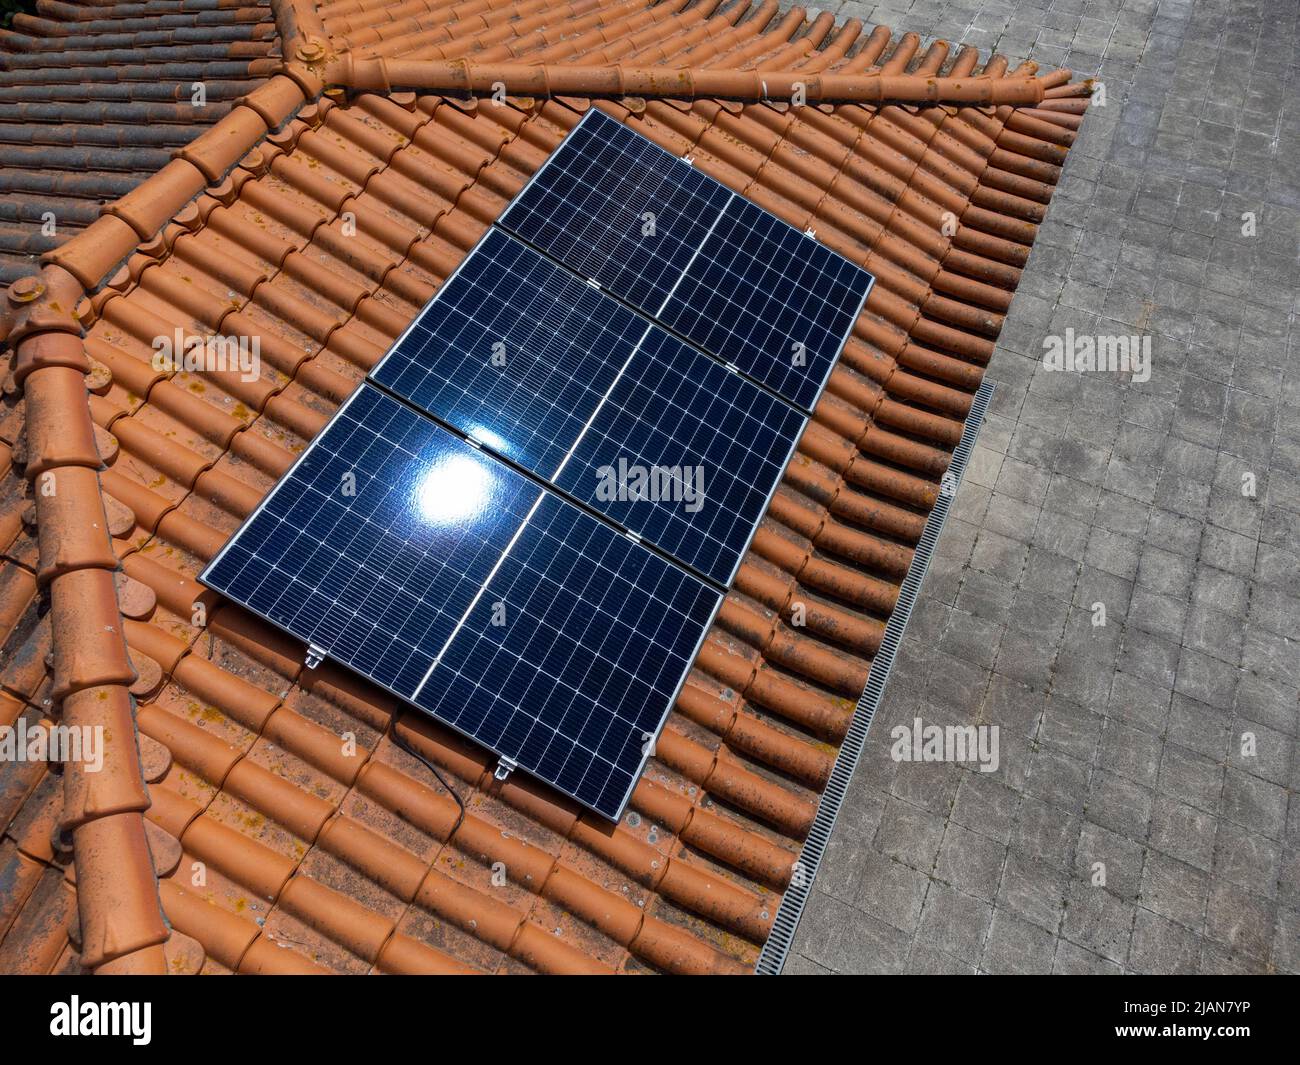 Three photovoltaic solar panels on the roof of a house Stock Photo